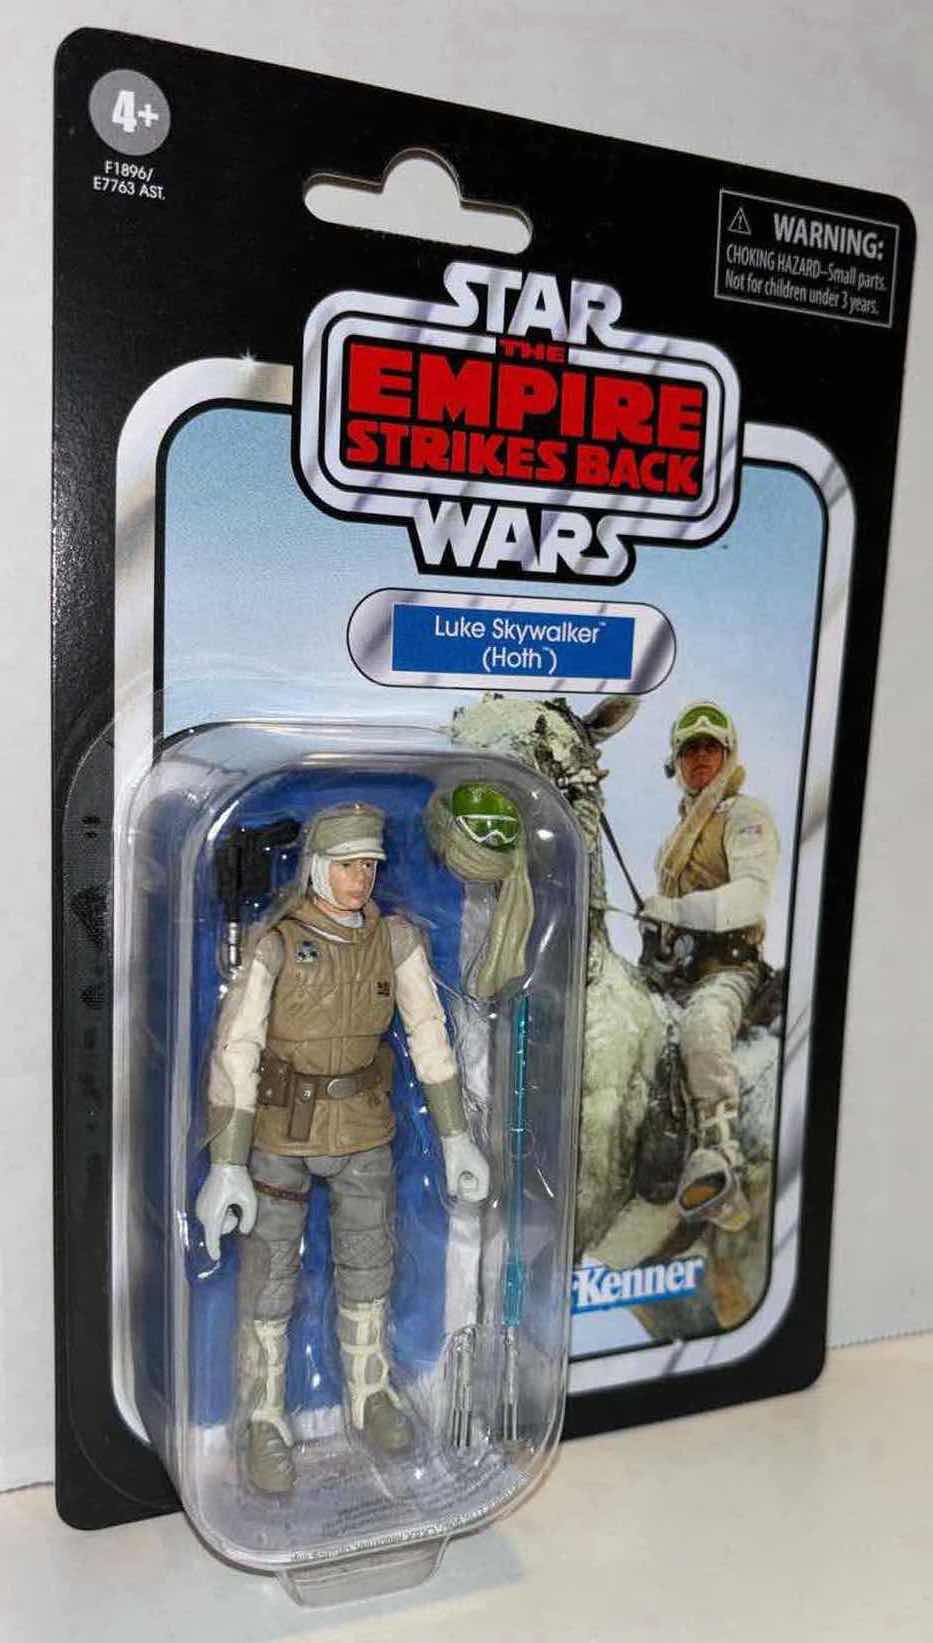 Photo 1 of NEW STAR WARS THE EMPIRE STRIKES BACK 3.75” THE VINTAGE COLLECTION ACTION FIGURE & ACCESSORIES, “LUKE SKYWALKER (HOTH)” (1)